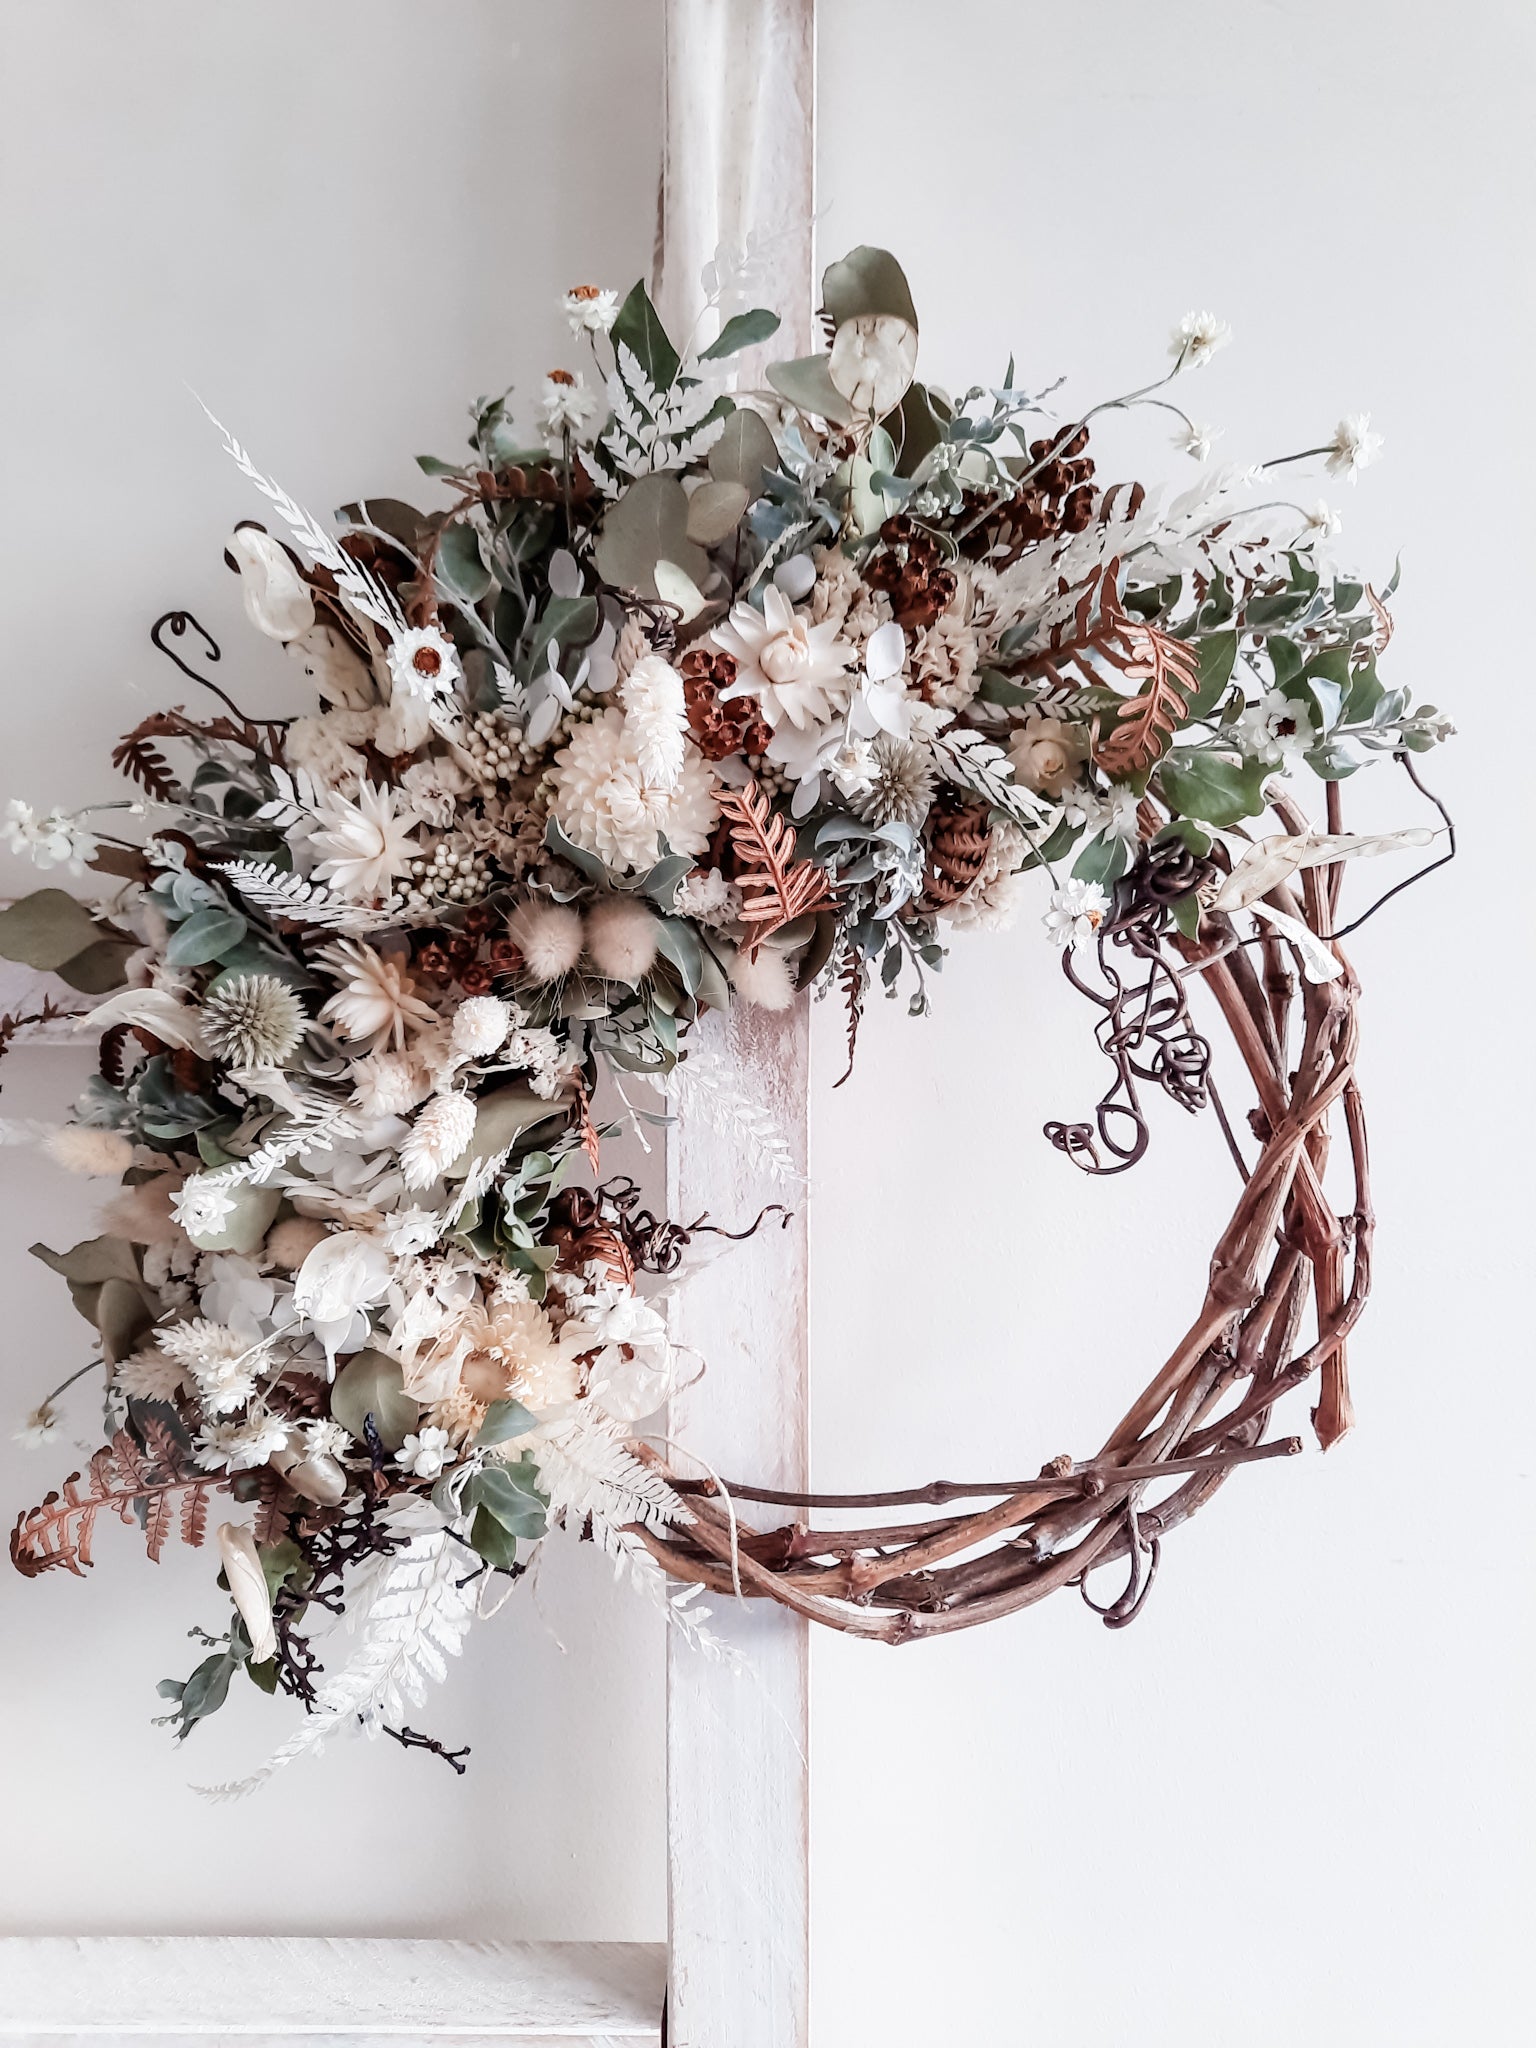 Dried flower wreath in a natural, rustic style on a grapevine base.